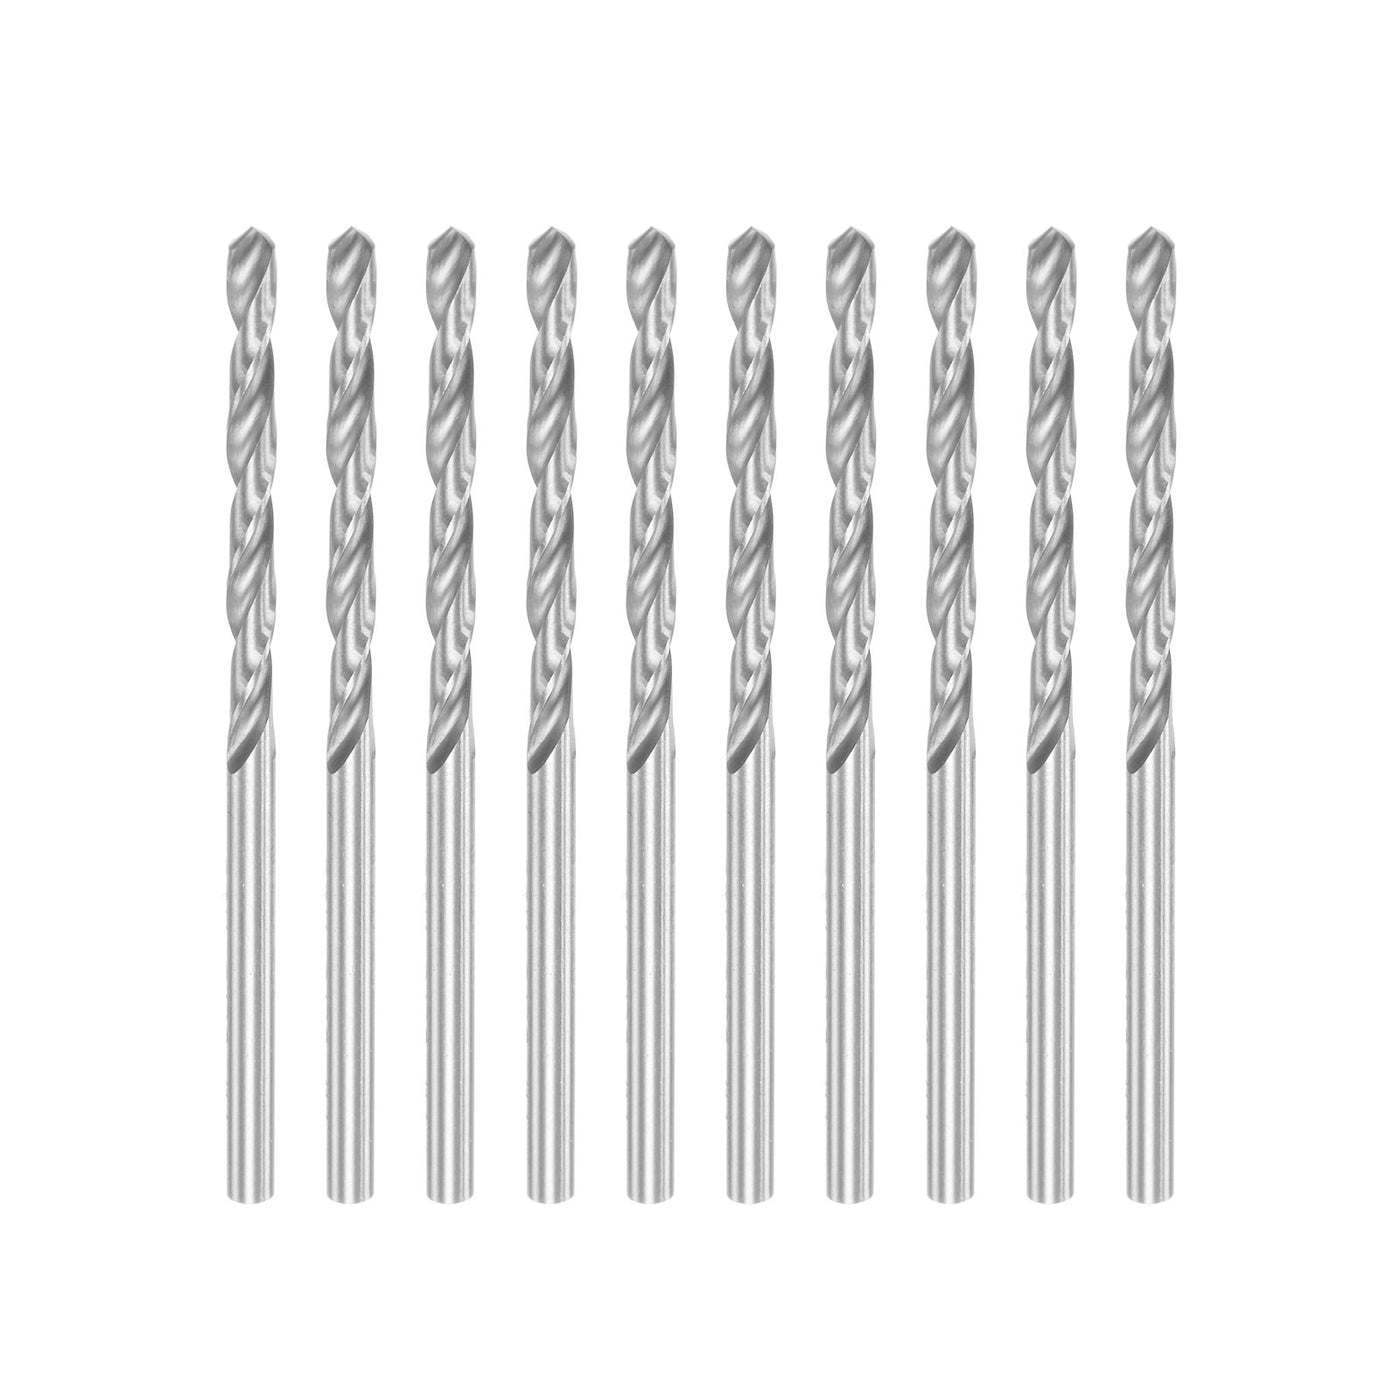 uxcell Uxcell 10 Pcs 3.15mm High Speed Steel Drill Bits, Fully Ground 65mm Length Drill Bit